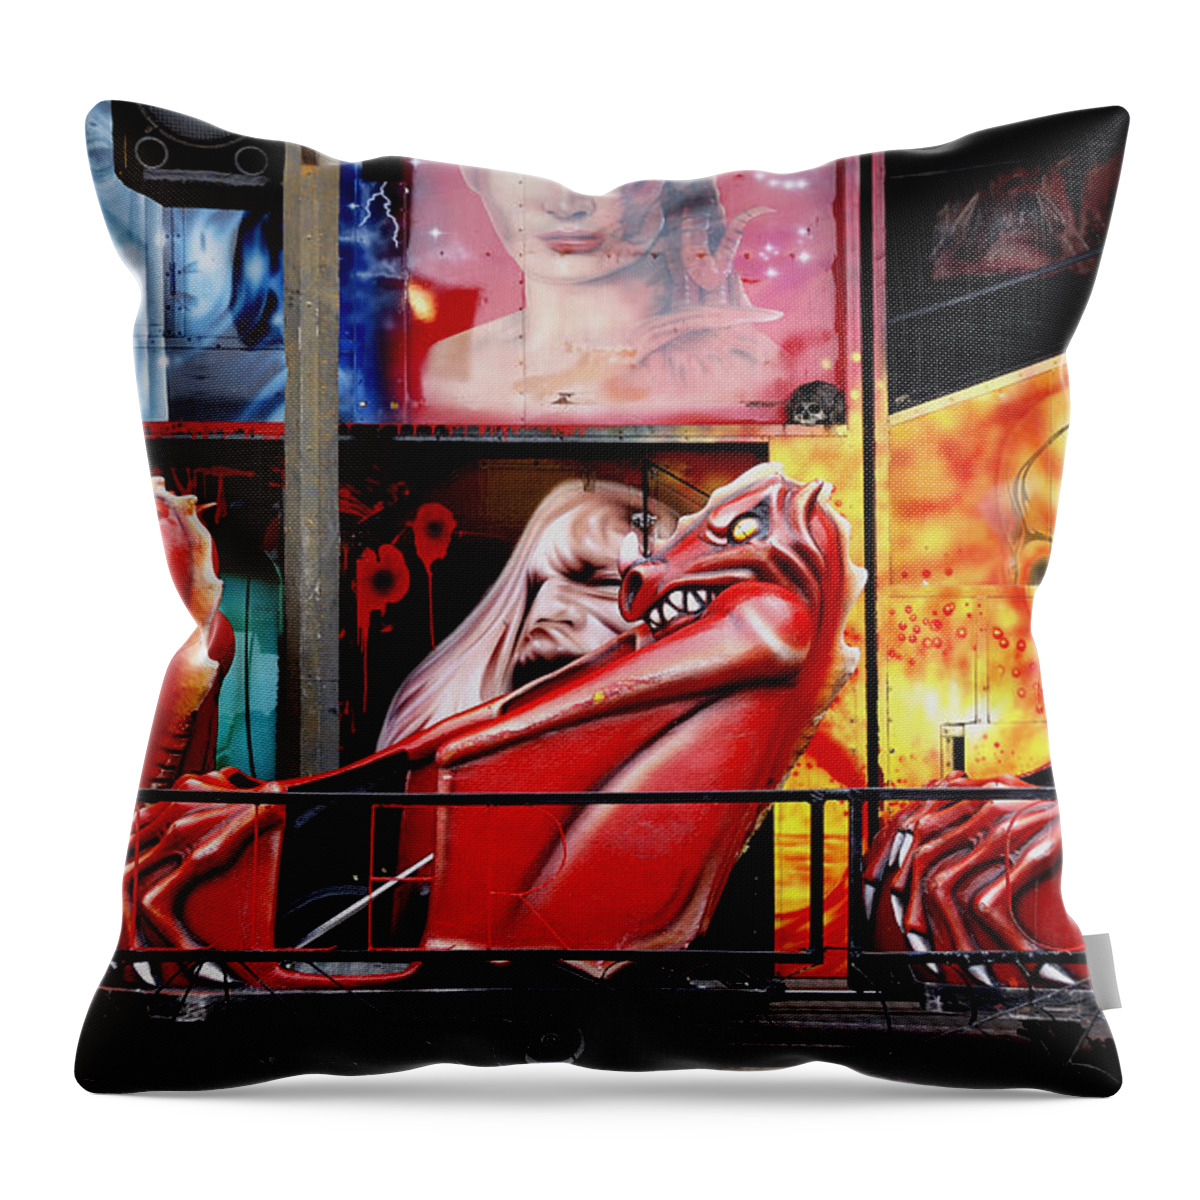 Ghost-train Throw Pillow featuring the photograph Ghost Train by Wayne Sherriff